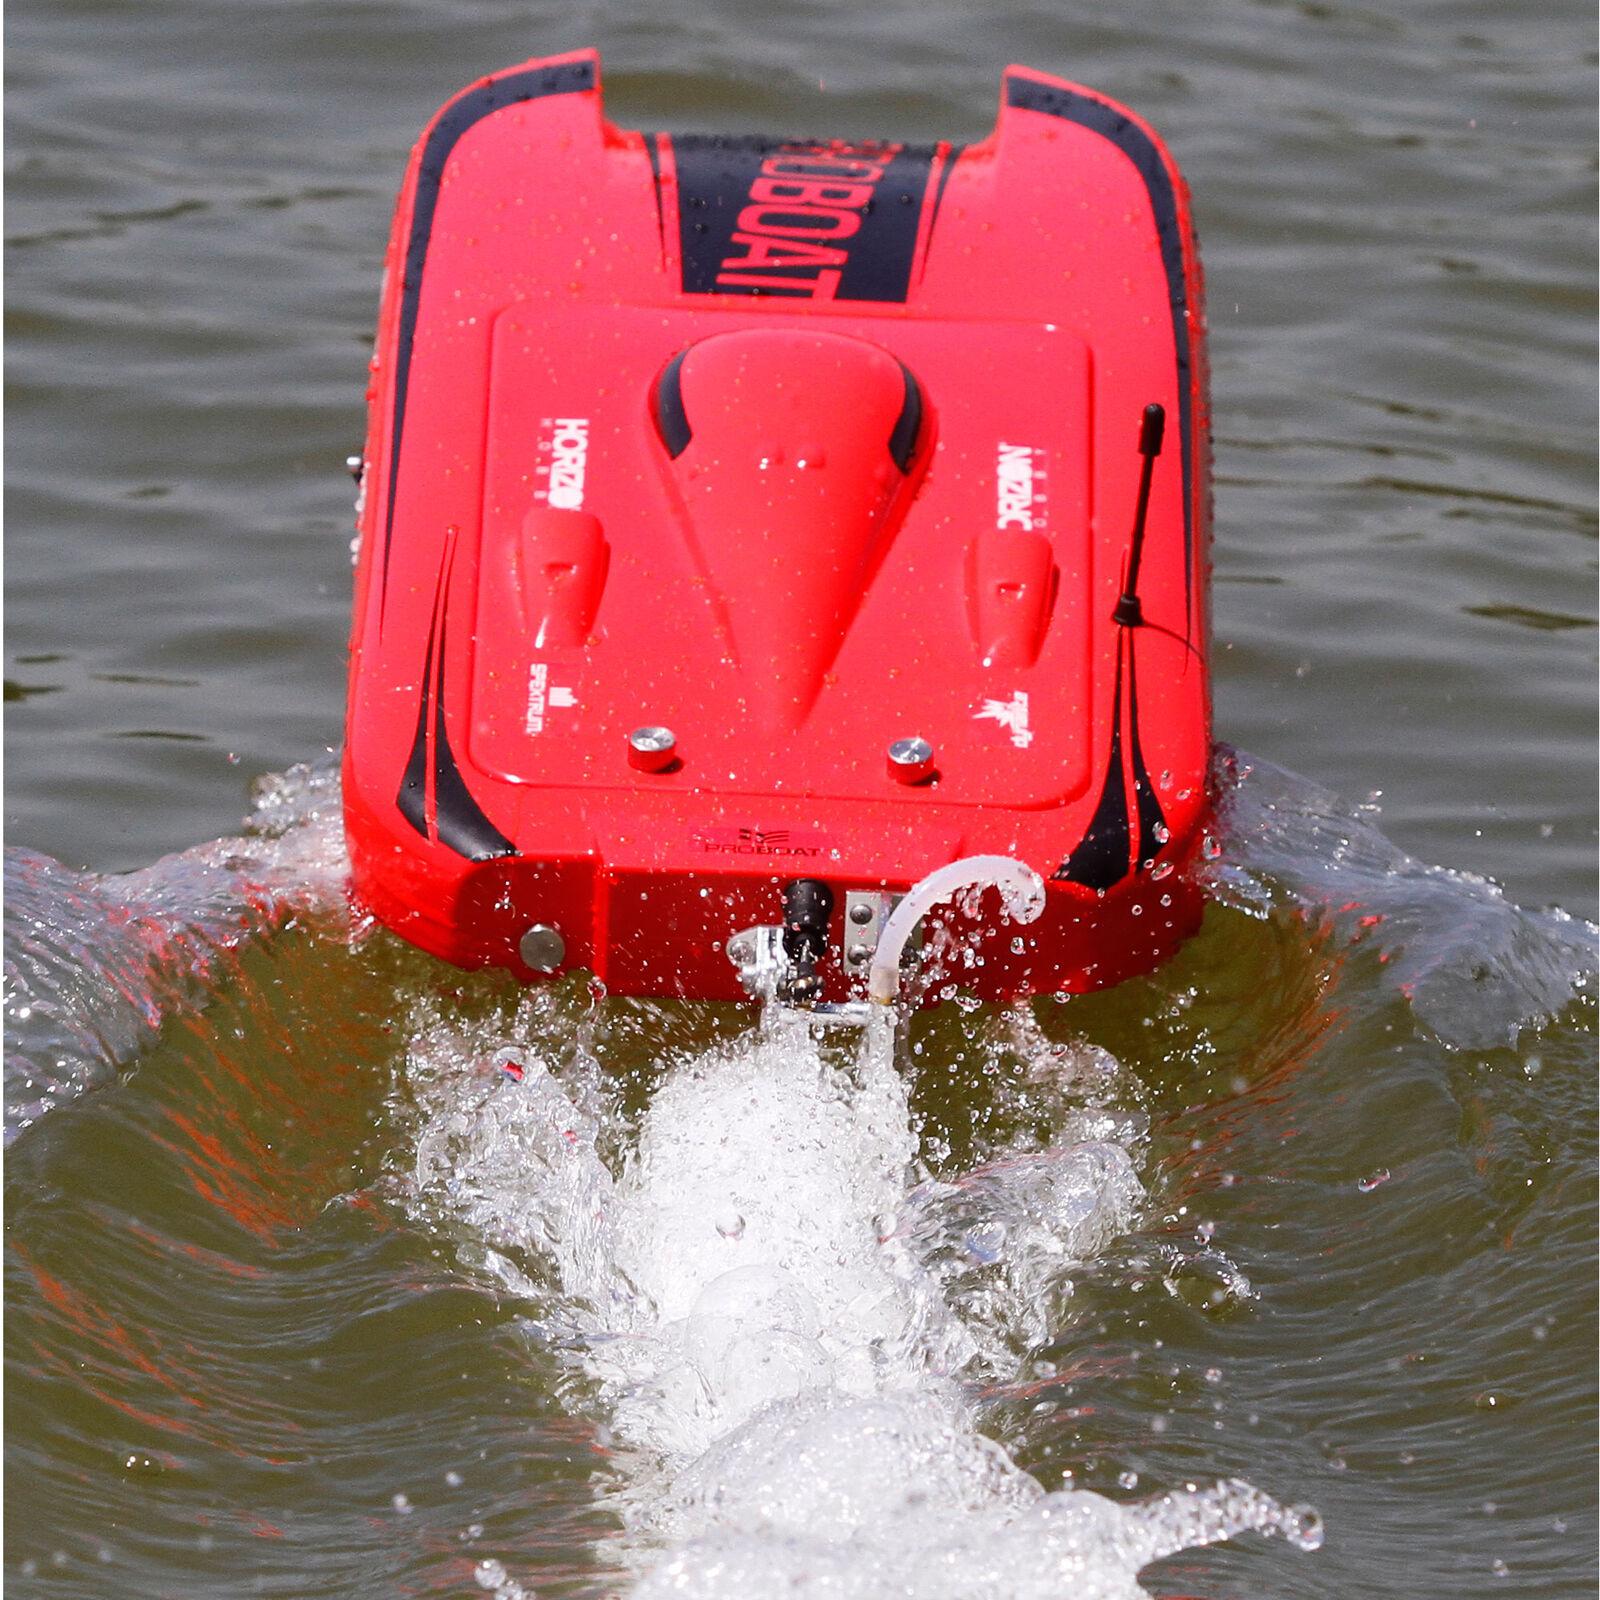 Pro Boat Rc Blackjack 24: What sets the Pro Boat RC Blackjack 24 apart from other remote-controlled boats?